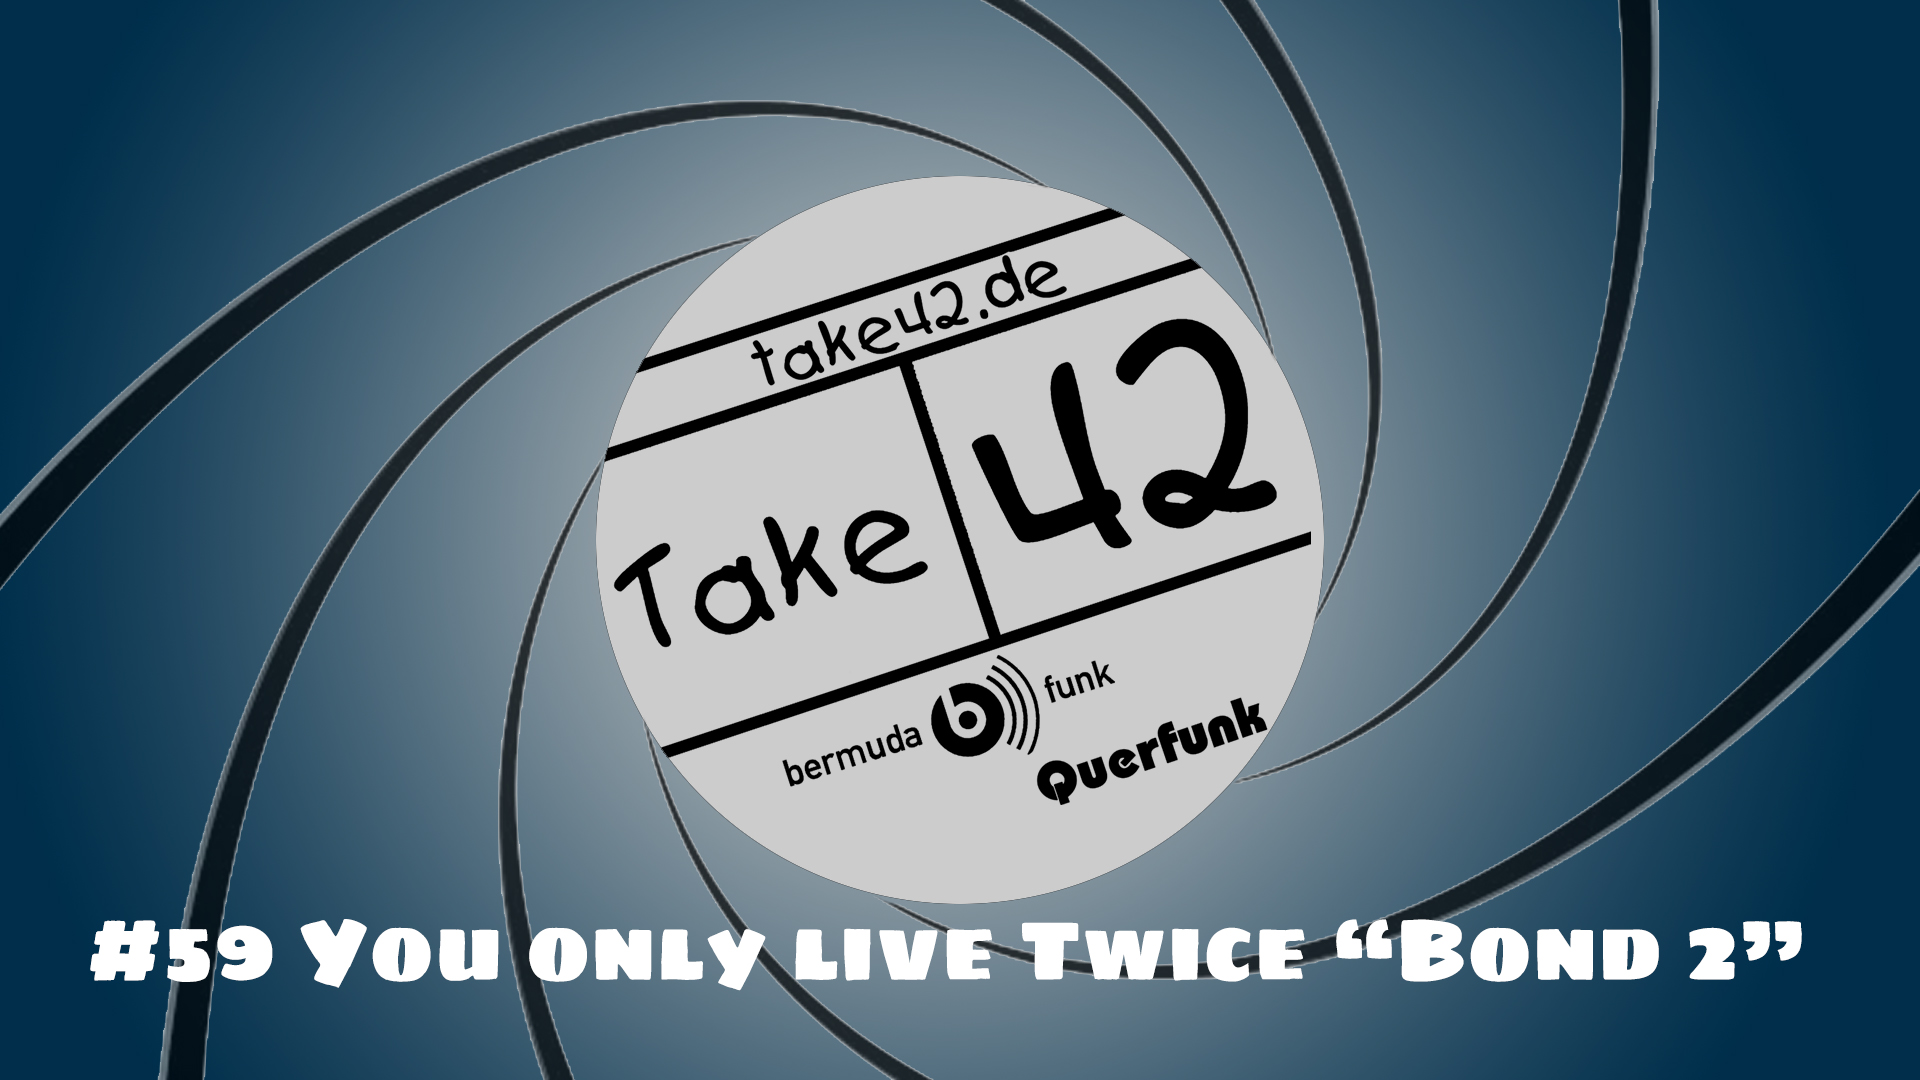 You only live twice @ Querfunk